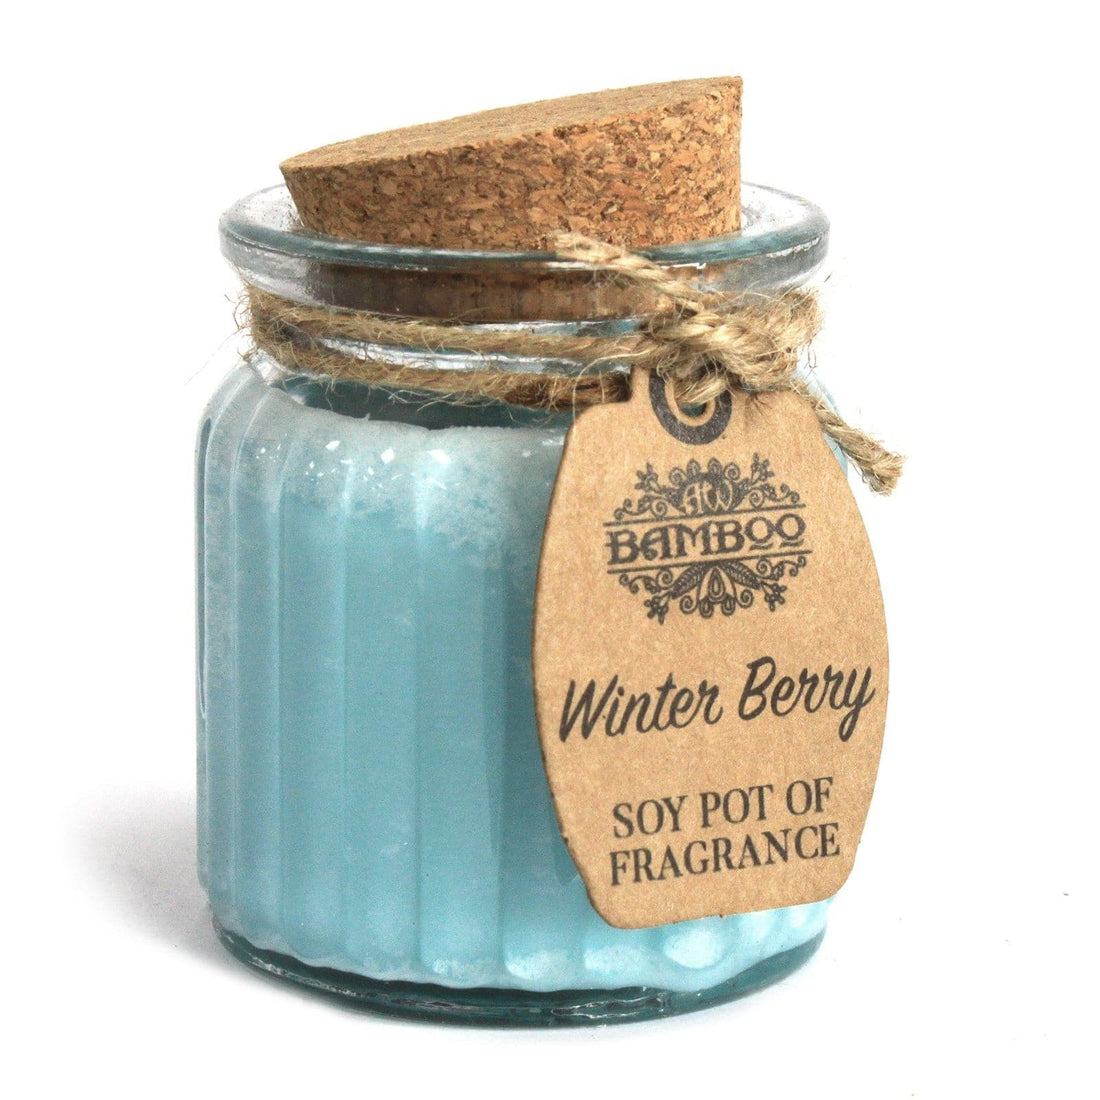 Winter Berry Soy Pot of Fragrance Candles - best price from Maltashopper.com SOYP-05